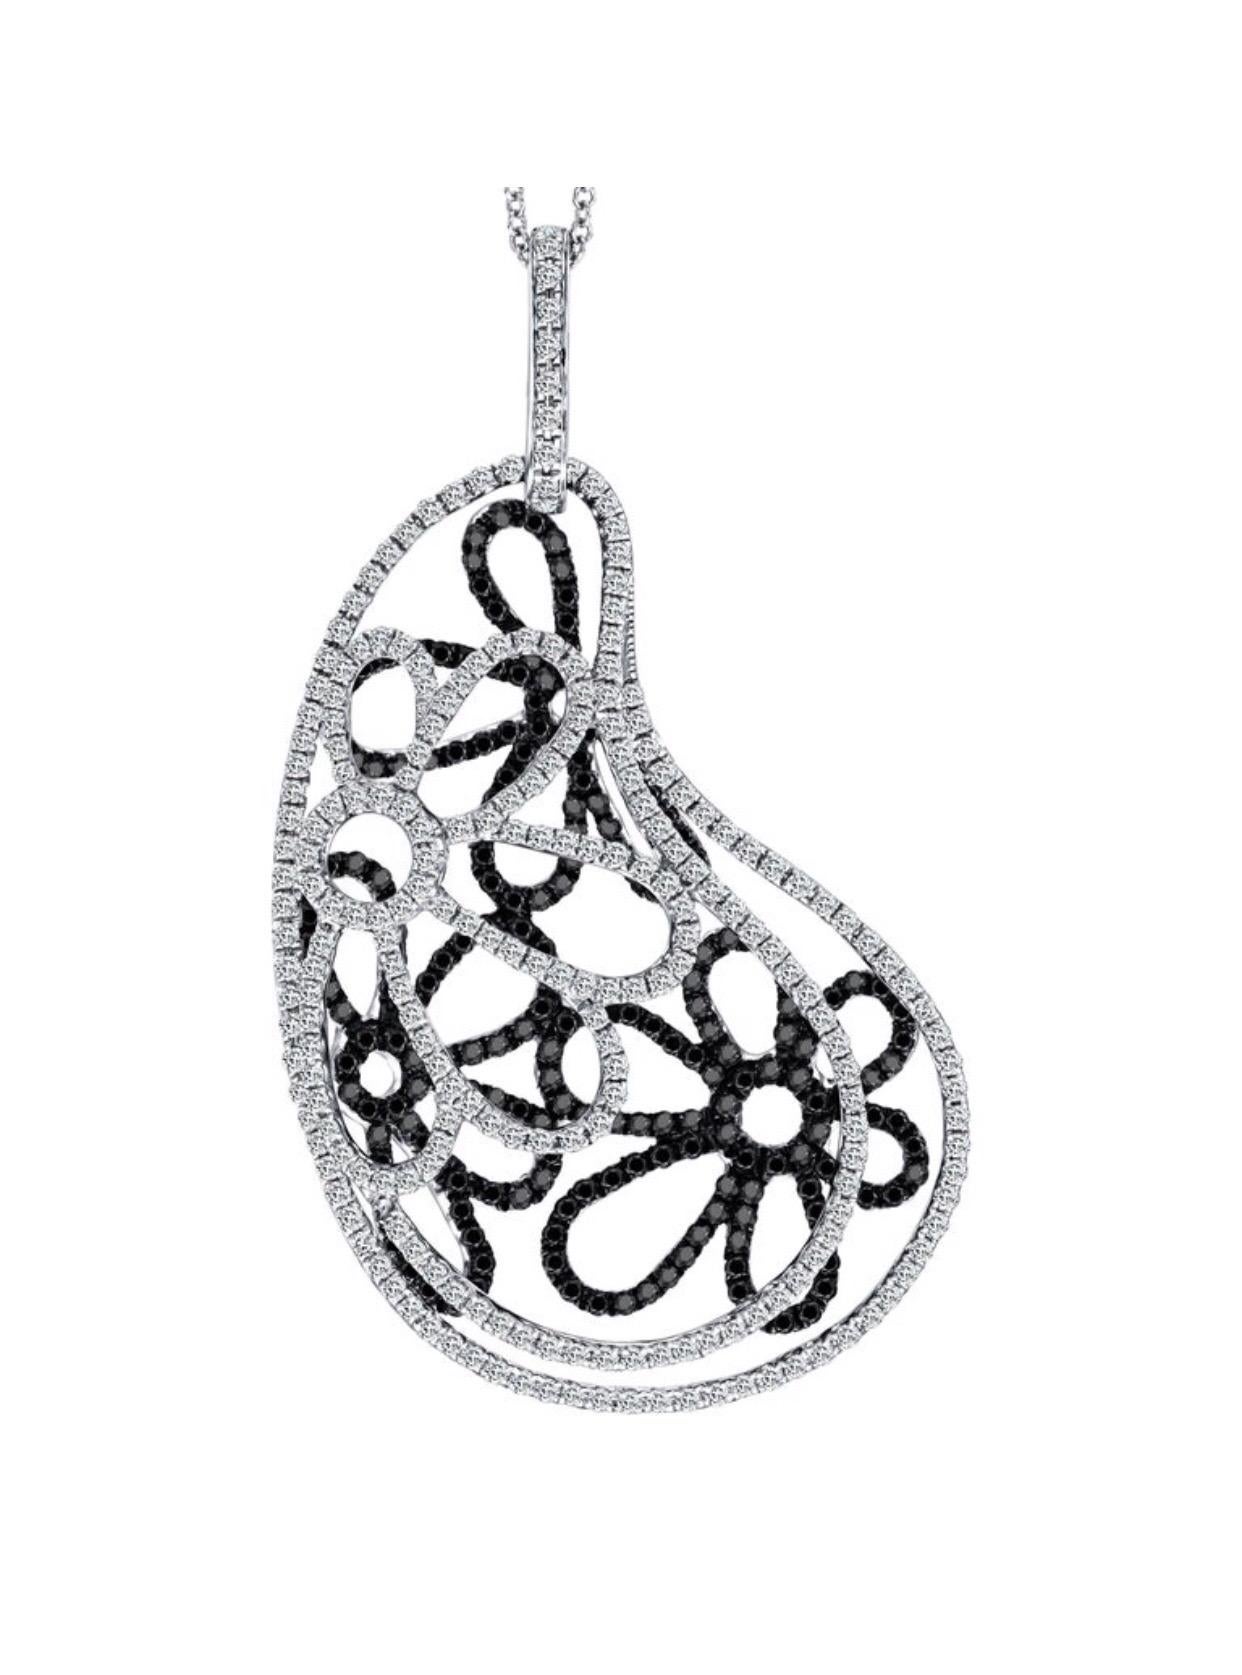 Round Cut Fancy floral pendant in 18k white gold with 1.81 carat black and white diamonds